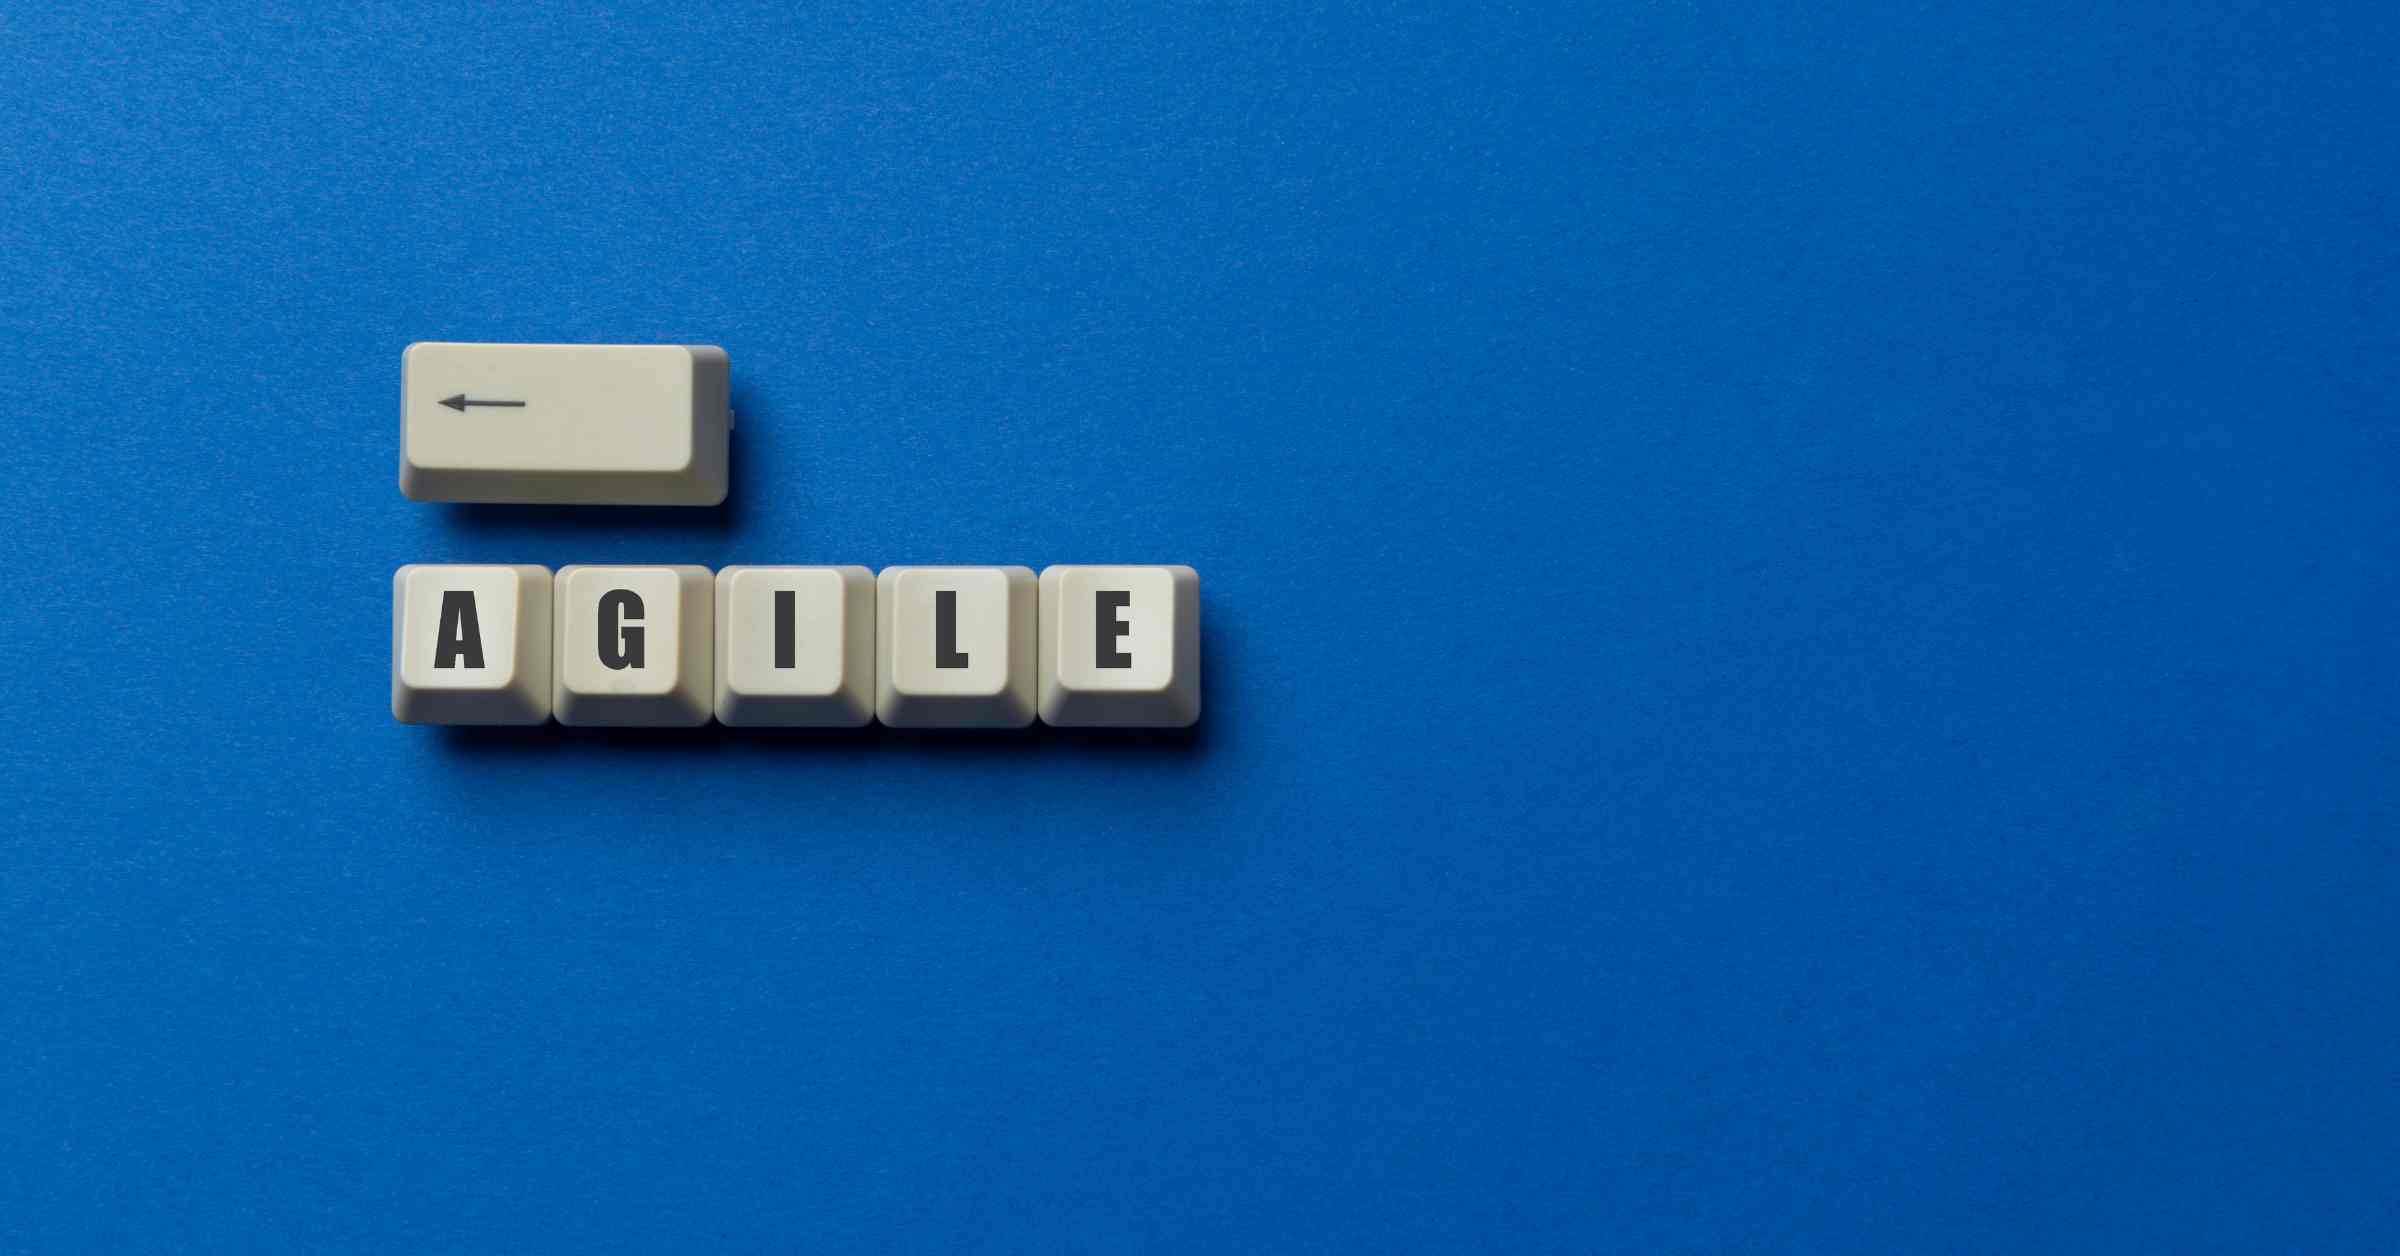 What Does It Mean To Be An Agile Company?